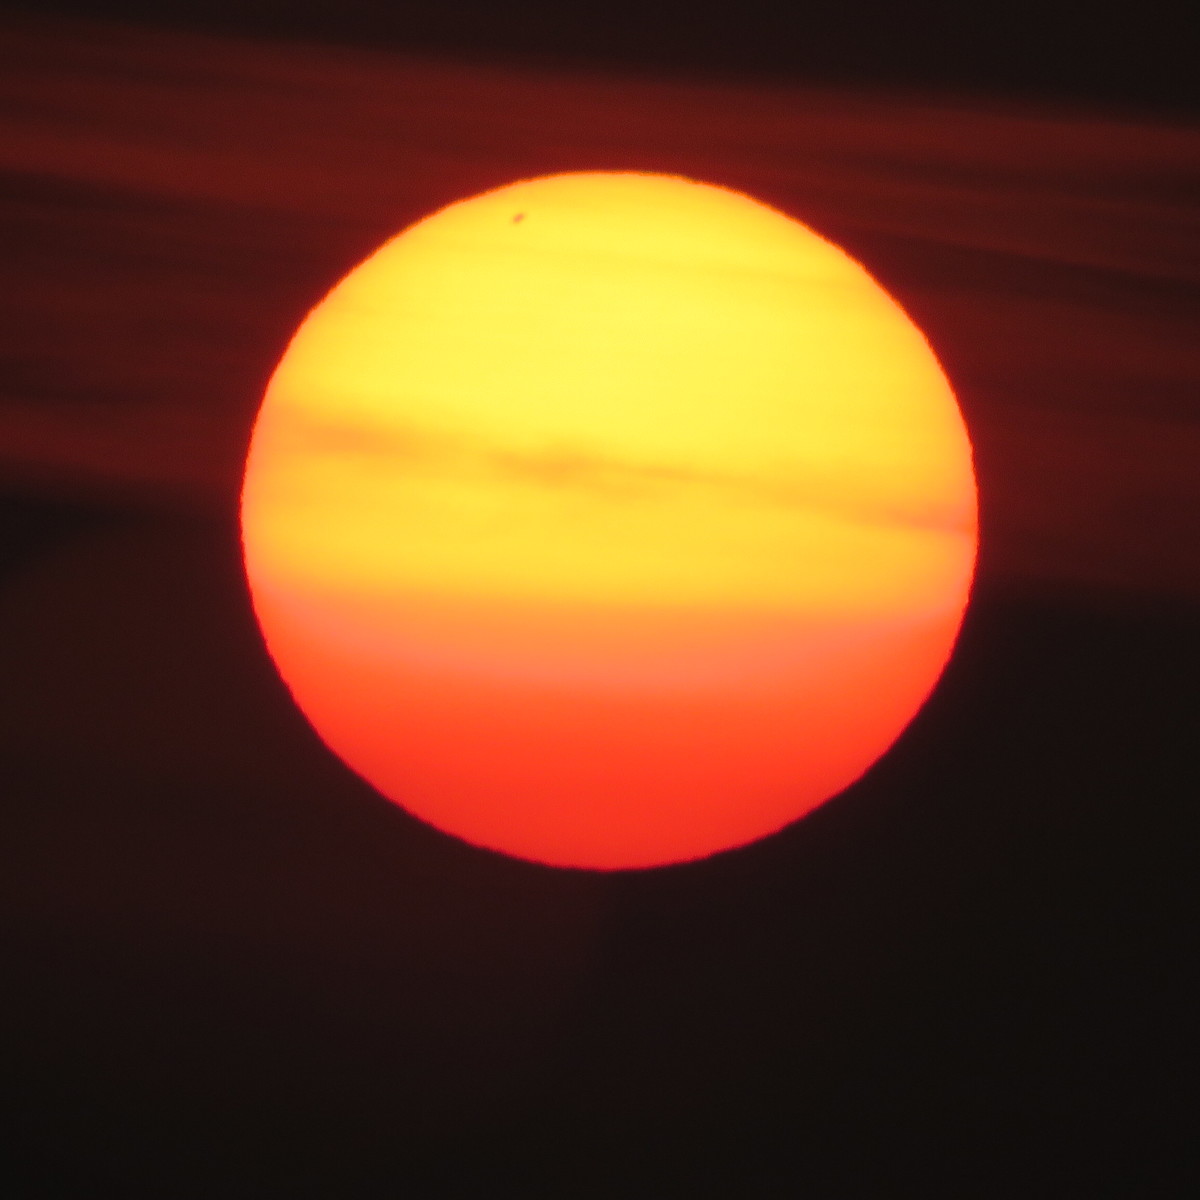 Sunset with sunspot. 8th April 2019 from Irlam, UK